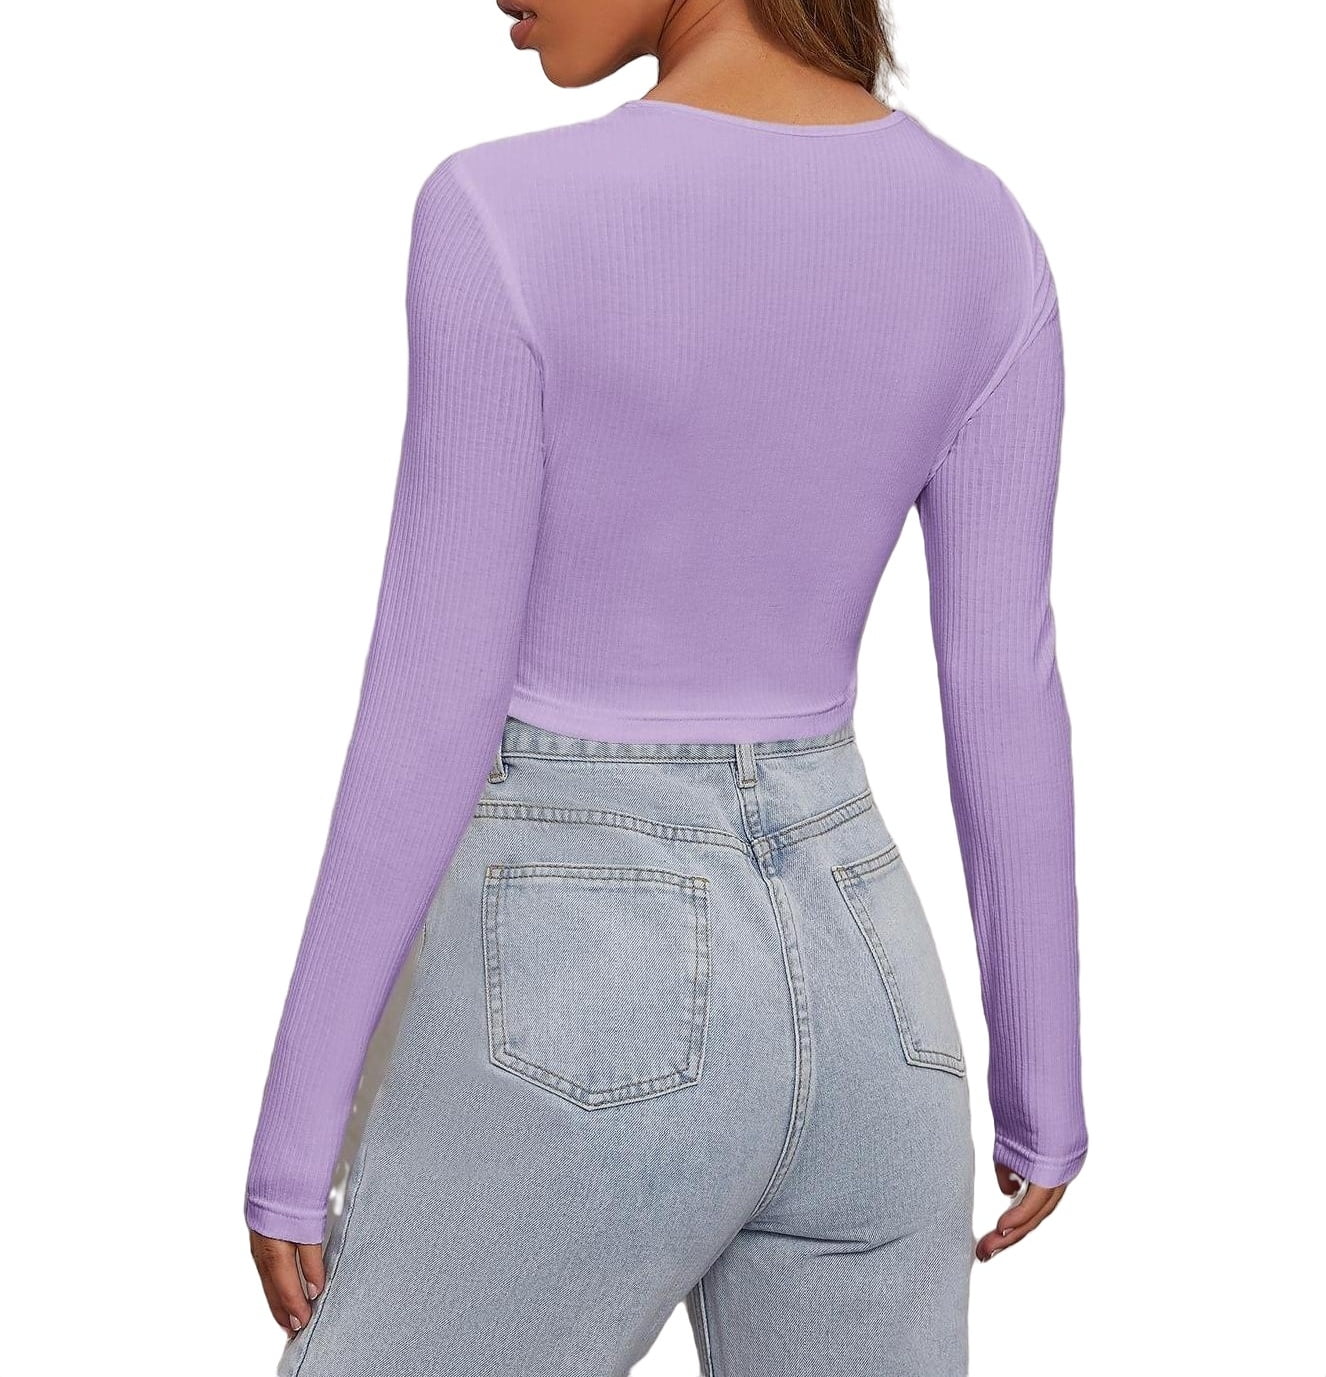 Casual Round Neck Long Sleeve Lilac Purple Womens T-Shirts (Women's)